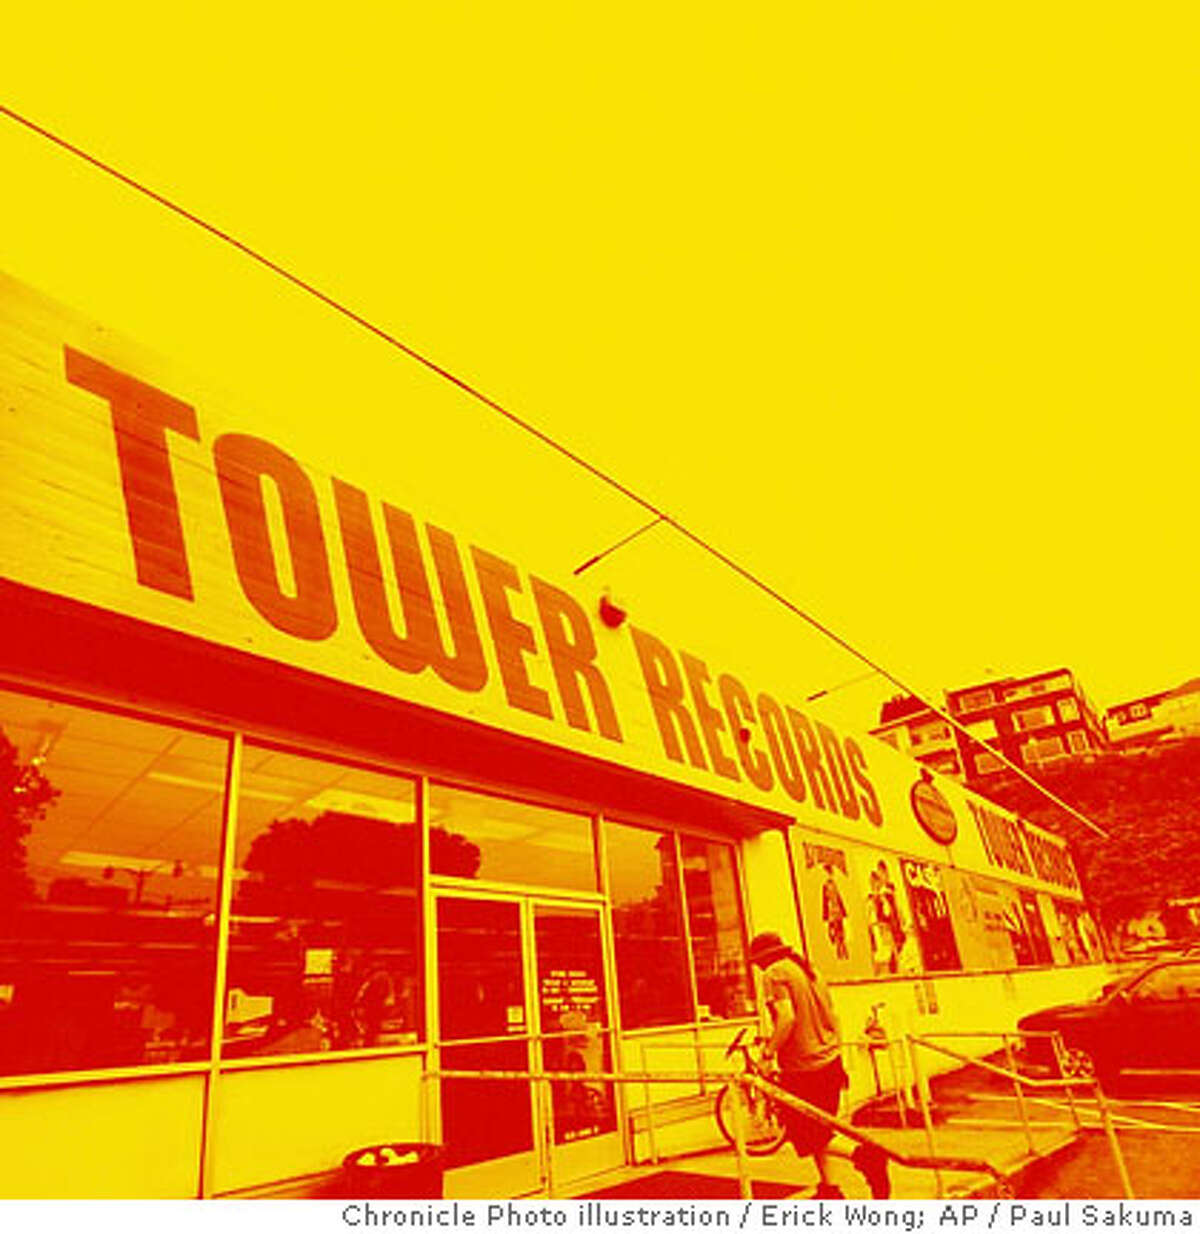 Photo illustration for Tower19 centerpiece on 10/19/06. Photo illustration: Erick Wong / The Chronicle Original Photo: Paul Sakuma / AP An exterior view of a Tower Records store is seen in San Francisco, Friday, Oct. 6, 2006. After a lengthy auction stretching over two days, a federal bankruptcy judge on Friday approved sale of California-based Tower Records to Great American Group, which plans to liquidate the music retailer. (AP Photo/Paul Sakuma) Ran on: 10-19-2006 Photo caption